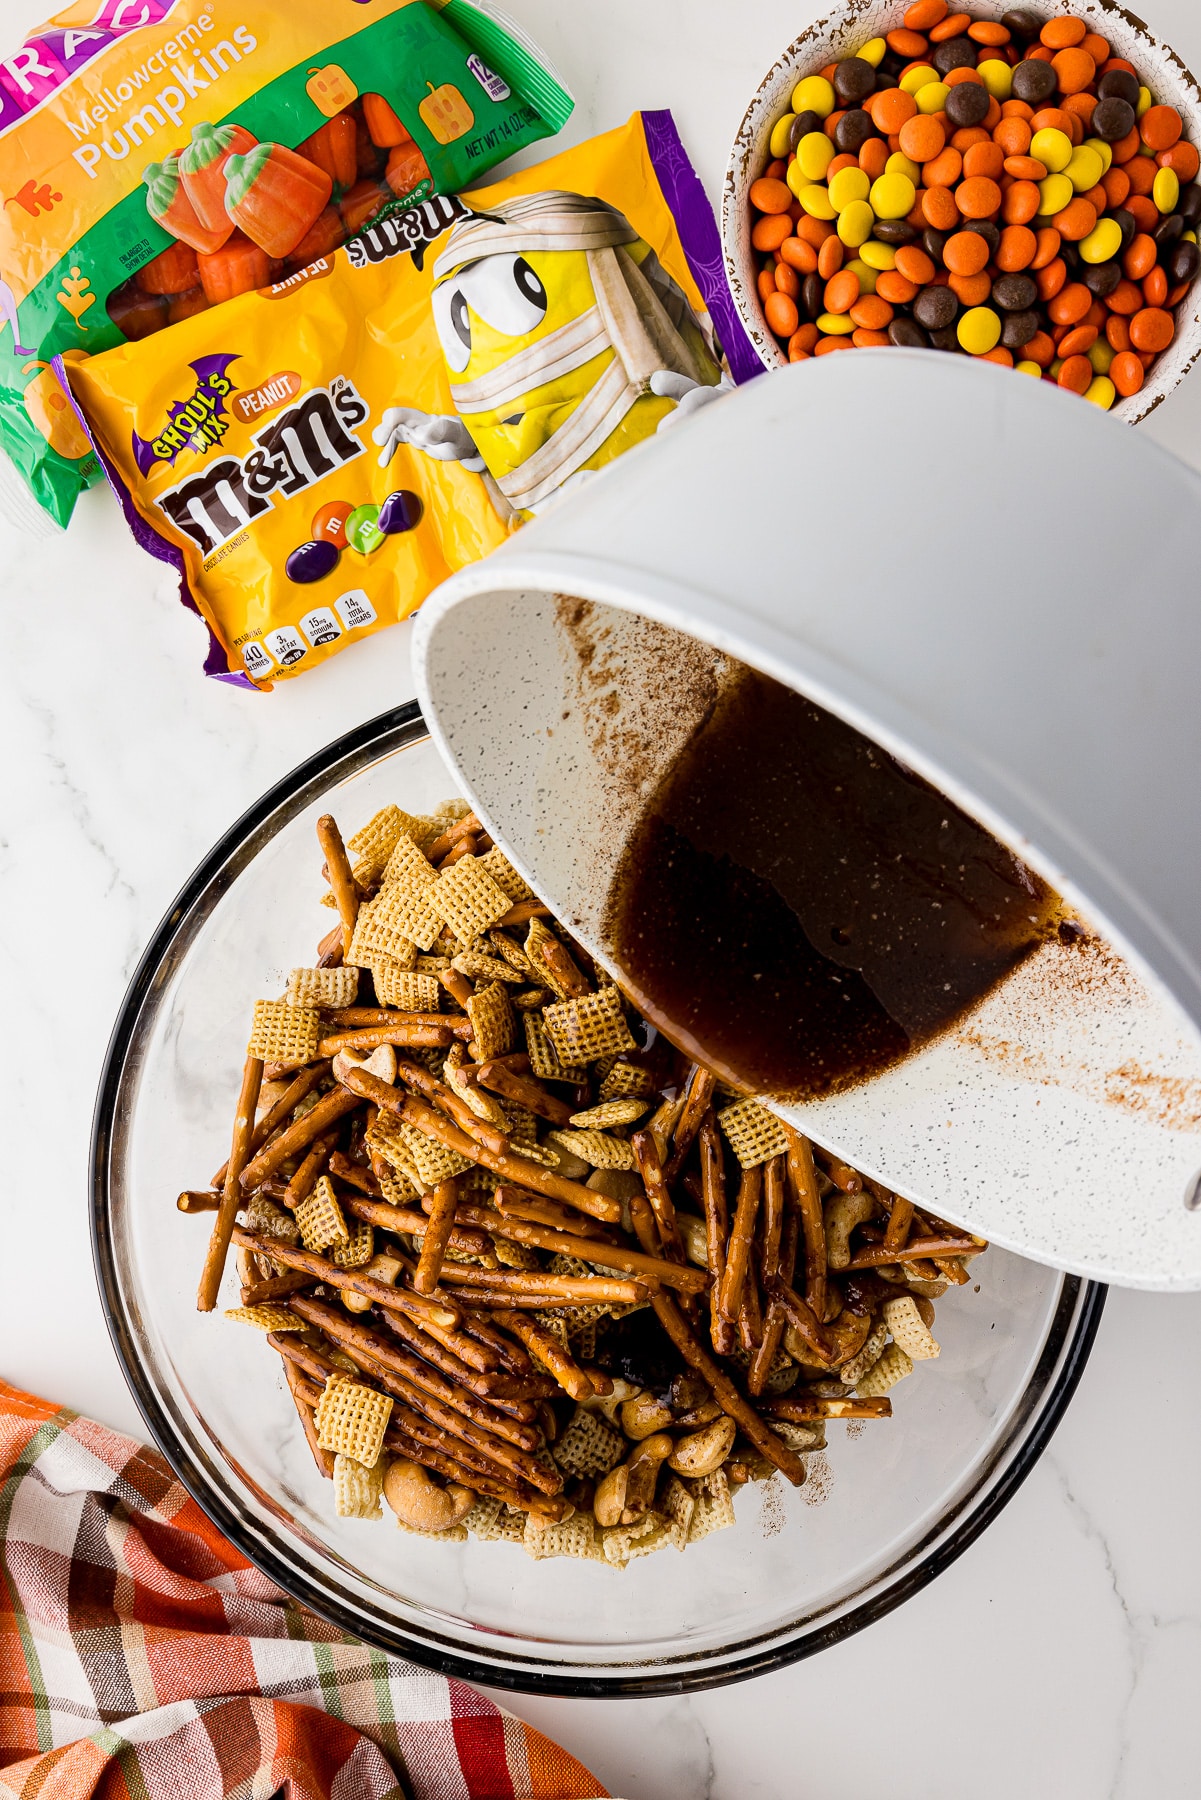 melted sugar coating pouring into a bowl of rice chex, corn chex, mini pretzels in a large glass bowl. Ghoul's mix peanut m&ms, and reese's pieces on the counter.